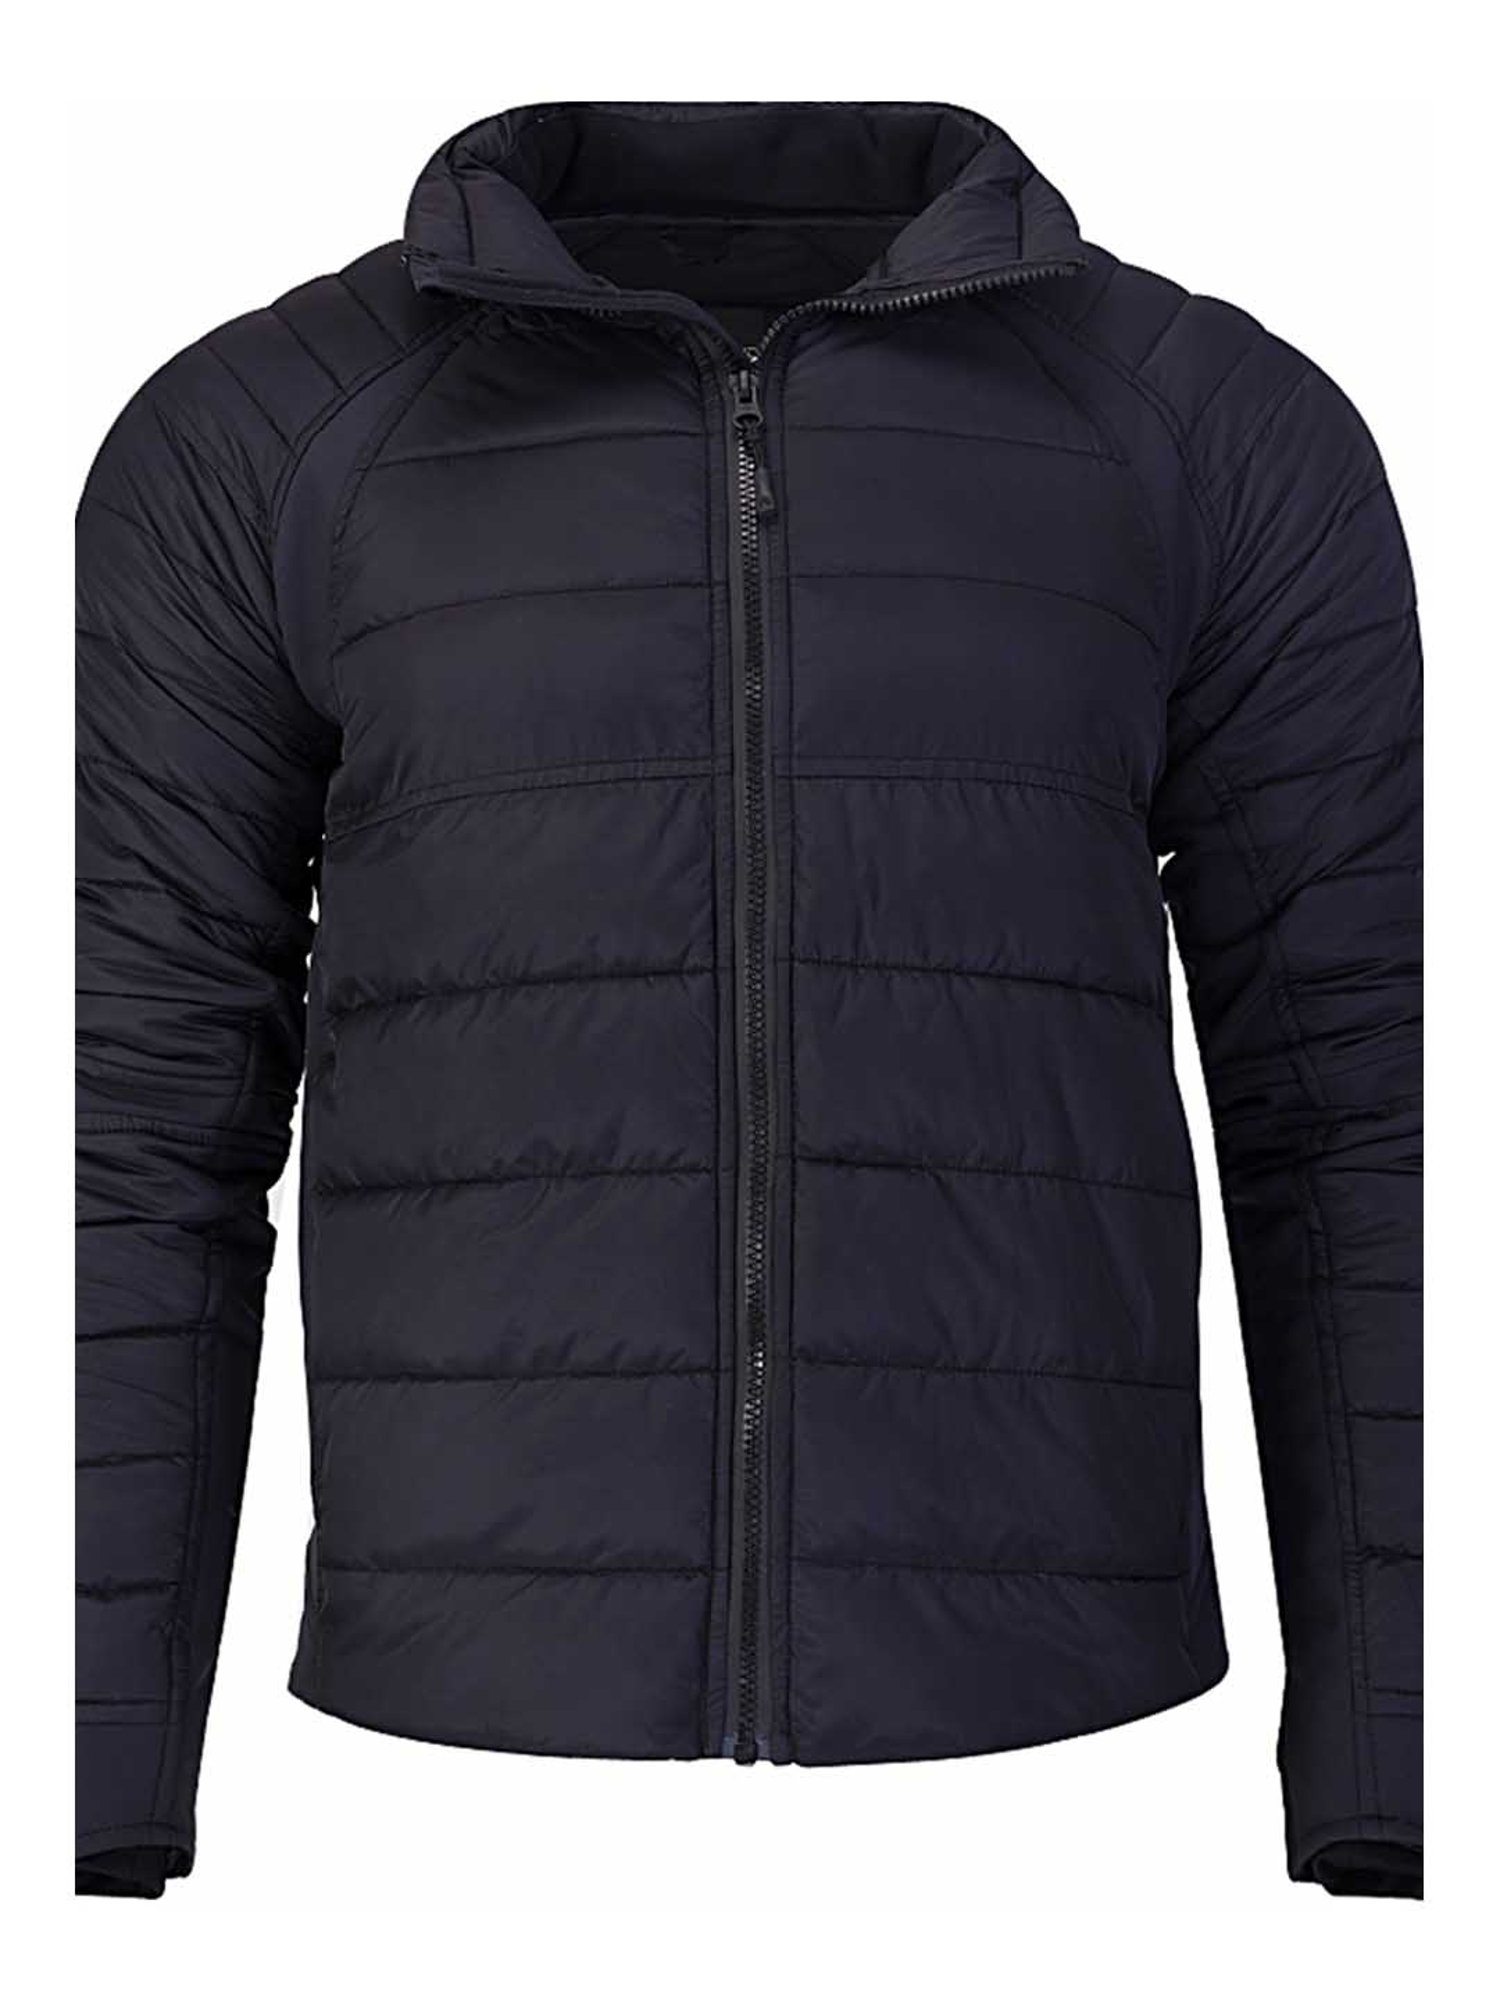 Men's Jackets | Purpose-Built Layers for Any Climate – Beyond Clothing